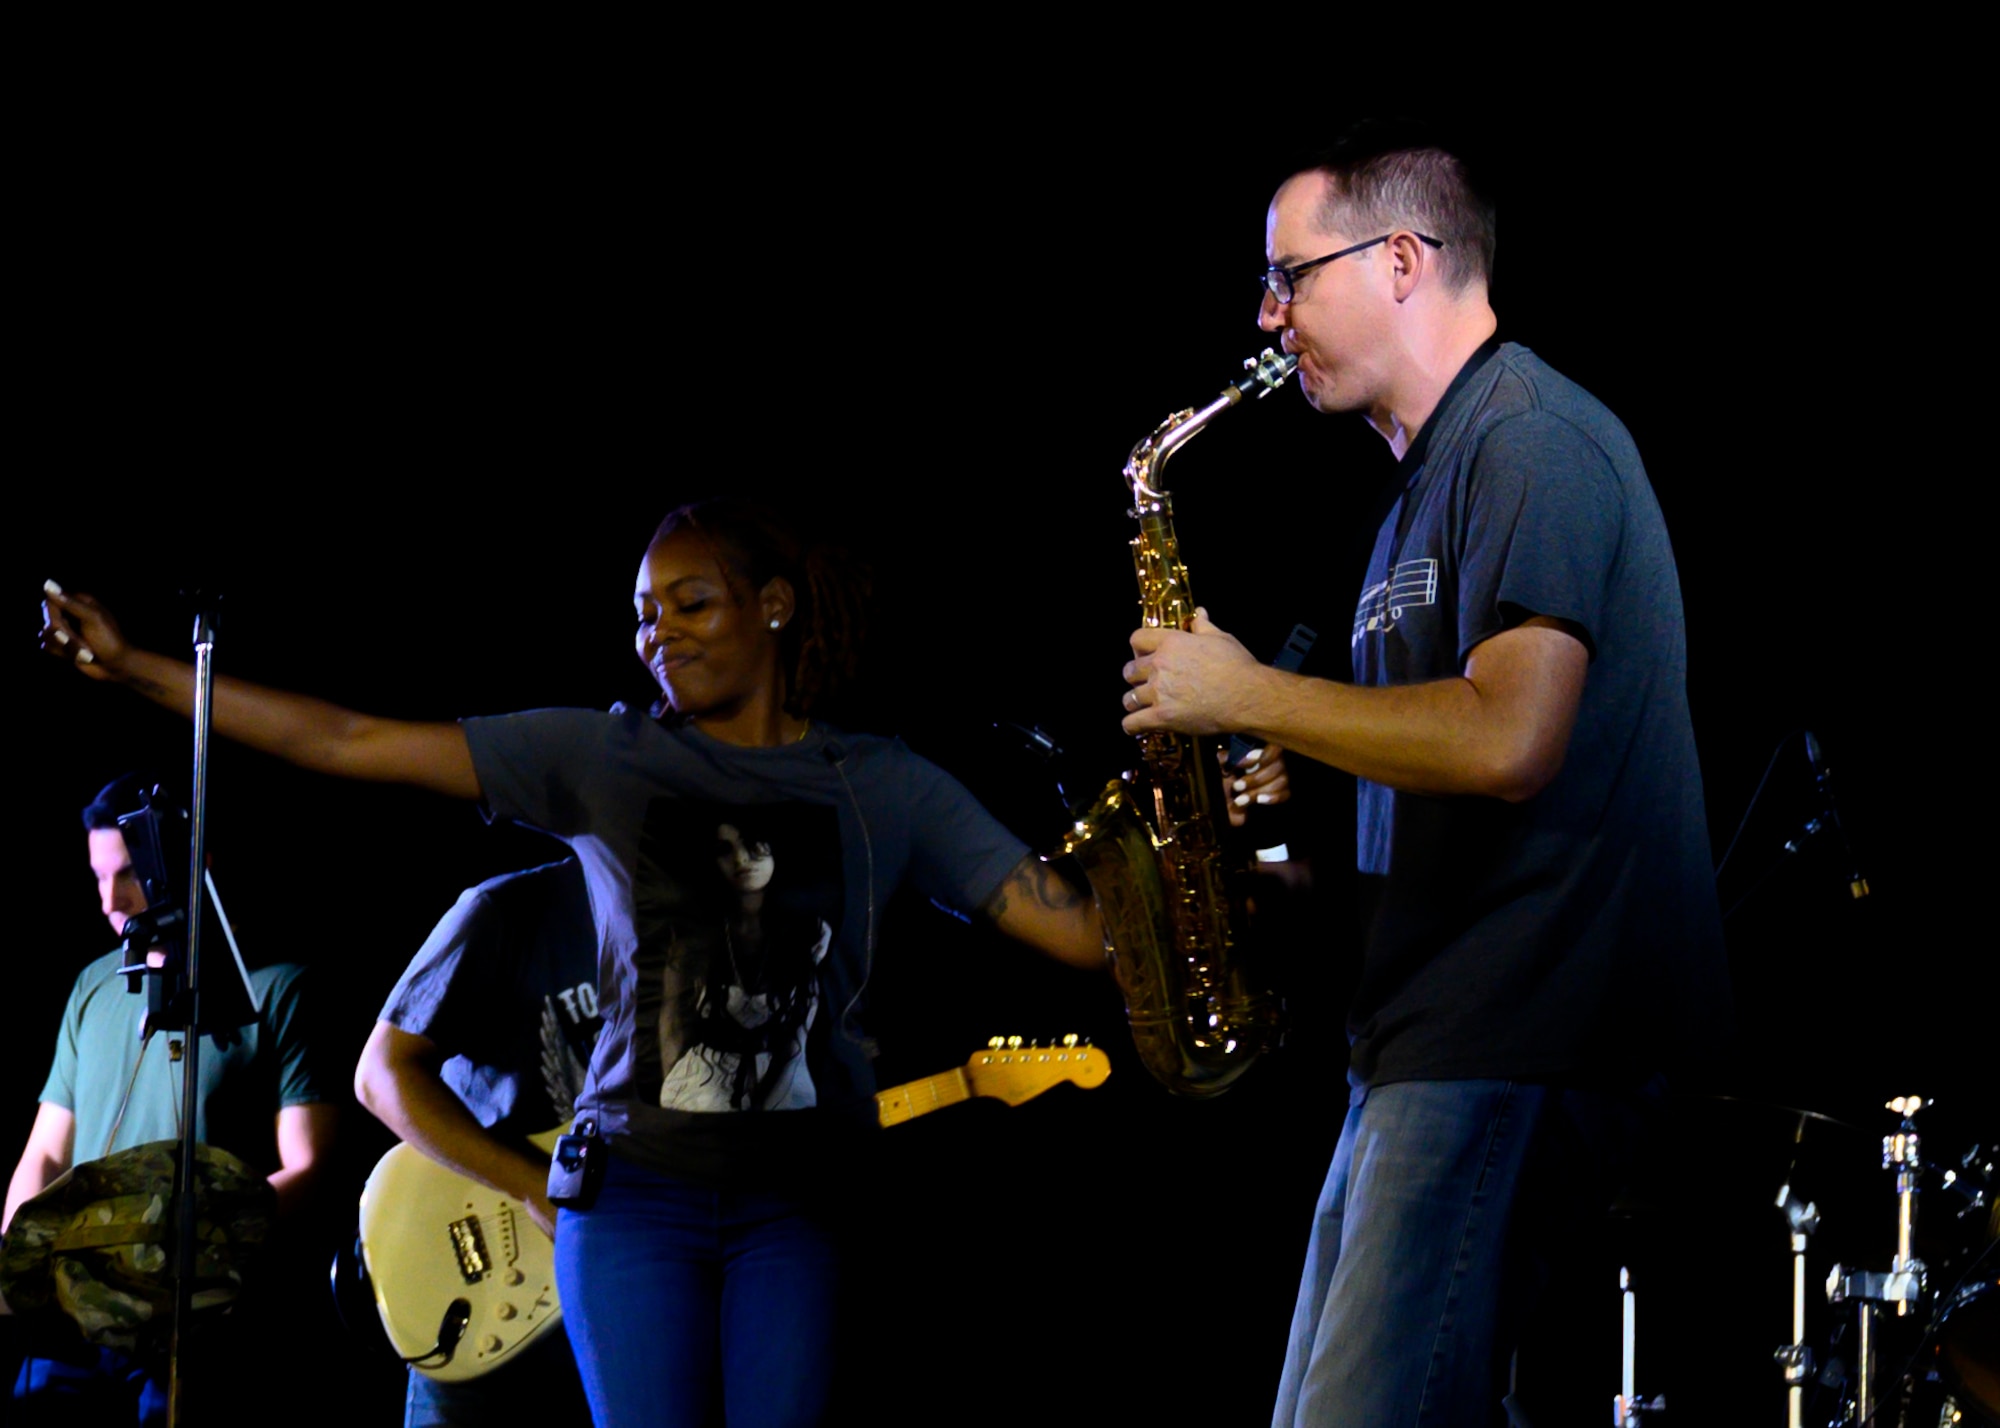 U.S. Air Force Tech. Sgt. Gregory Pflugh, U.S. Air Forces Central Band saxophonist and NCOIC of operations, right, and Senior Airman Me-Lan Smartt, AFCENT Band vocalist, center, perform during a concert at Prince Sultan Air Base, Kingdom of Saudi Arabia, Oct. 16, 2021. The 378th Air Expeditionary Wing hosted two nights of performances in recognition and celebration of the base’s accomplishments throughout the past summer. (U.S. Air Force photo by Senior Airman Samuel Earick)